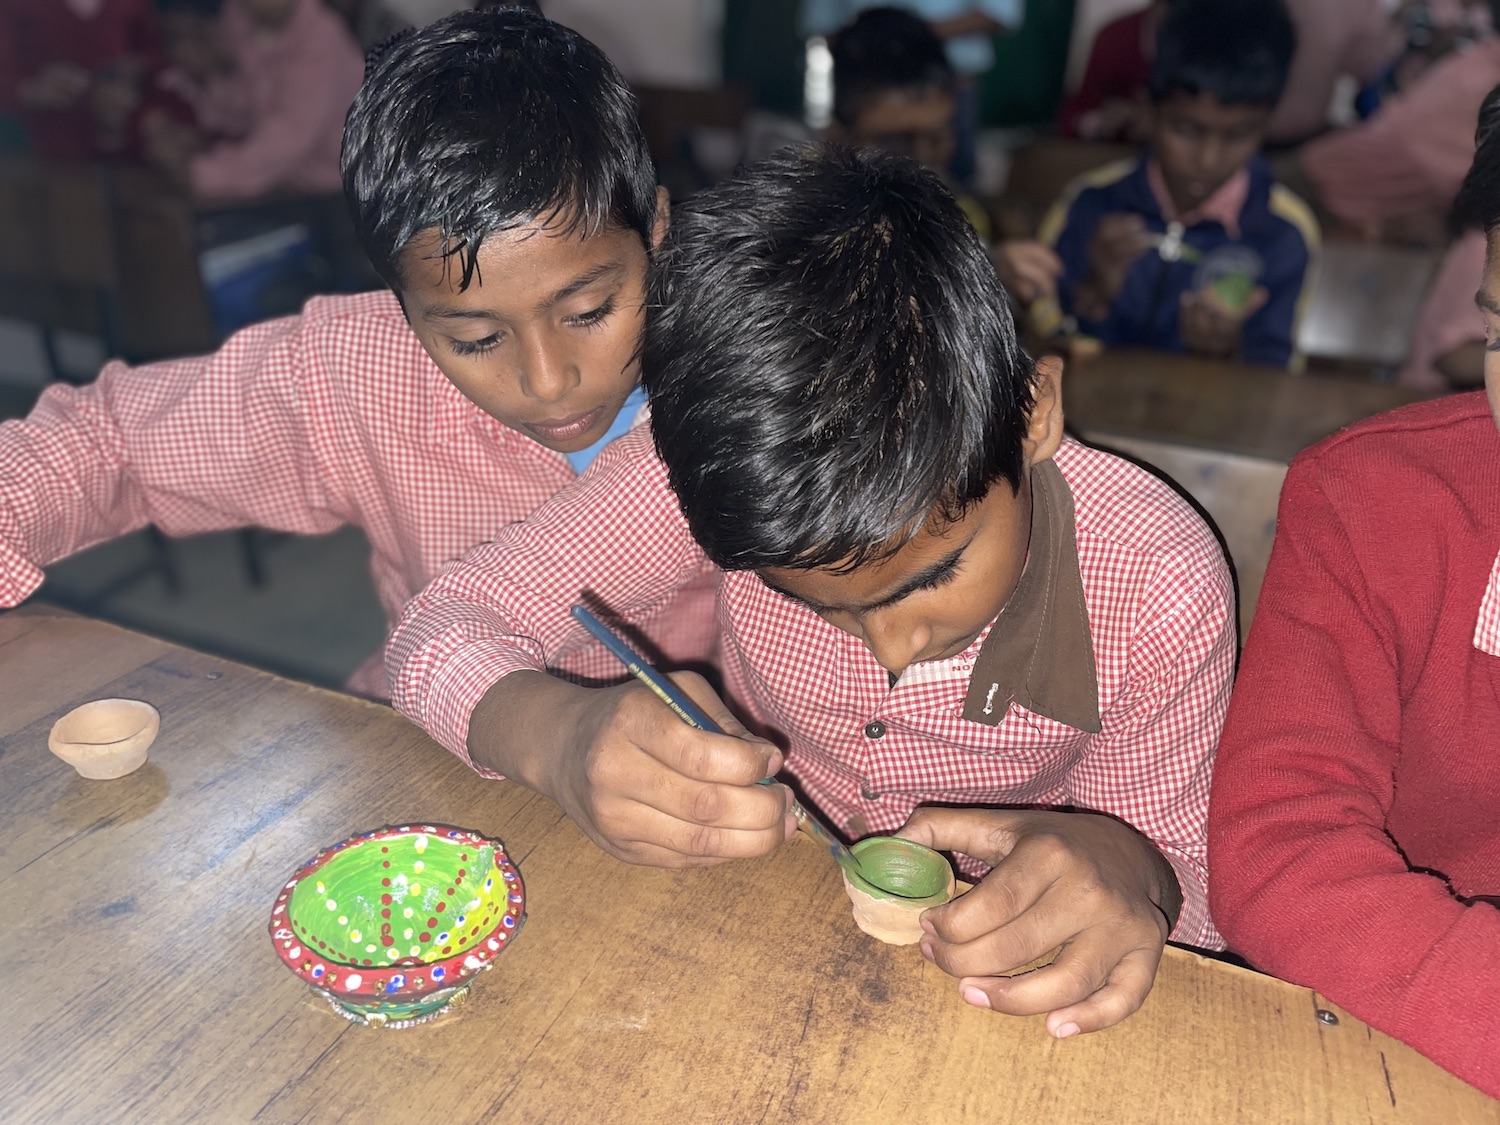 A group of children are working on a table in a classroom during the Festival of Lights, Diwali.